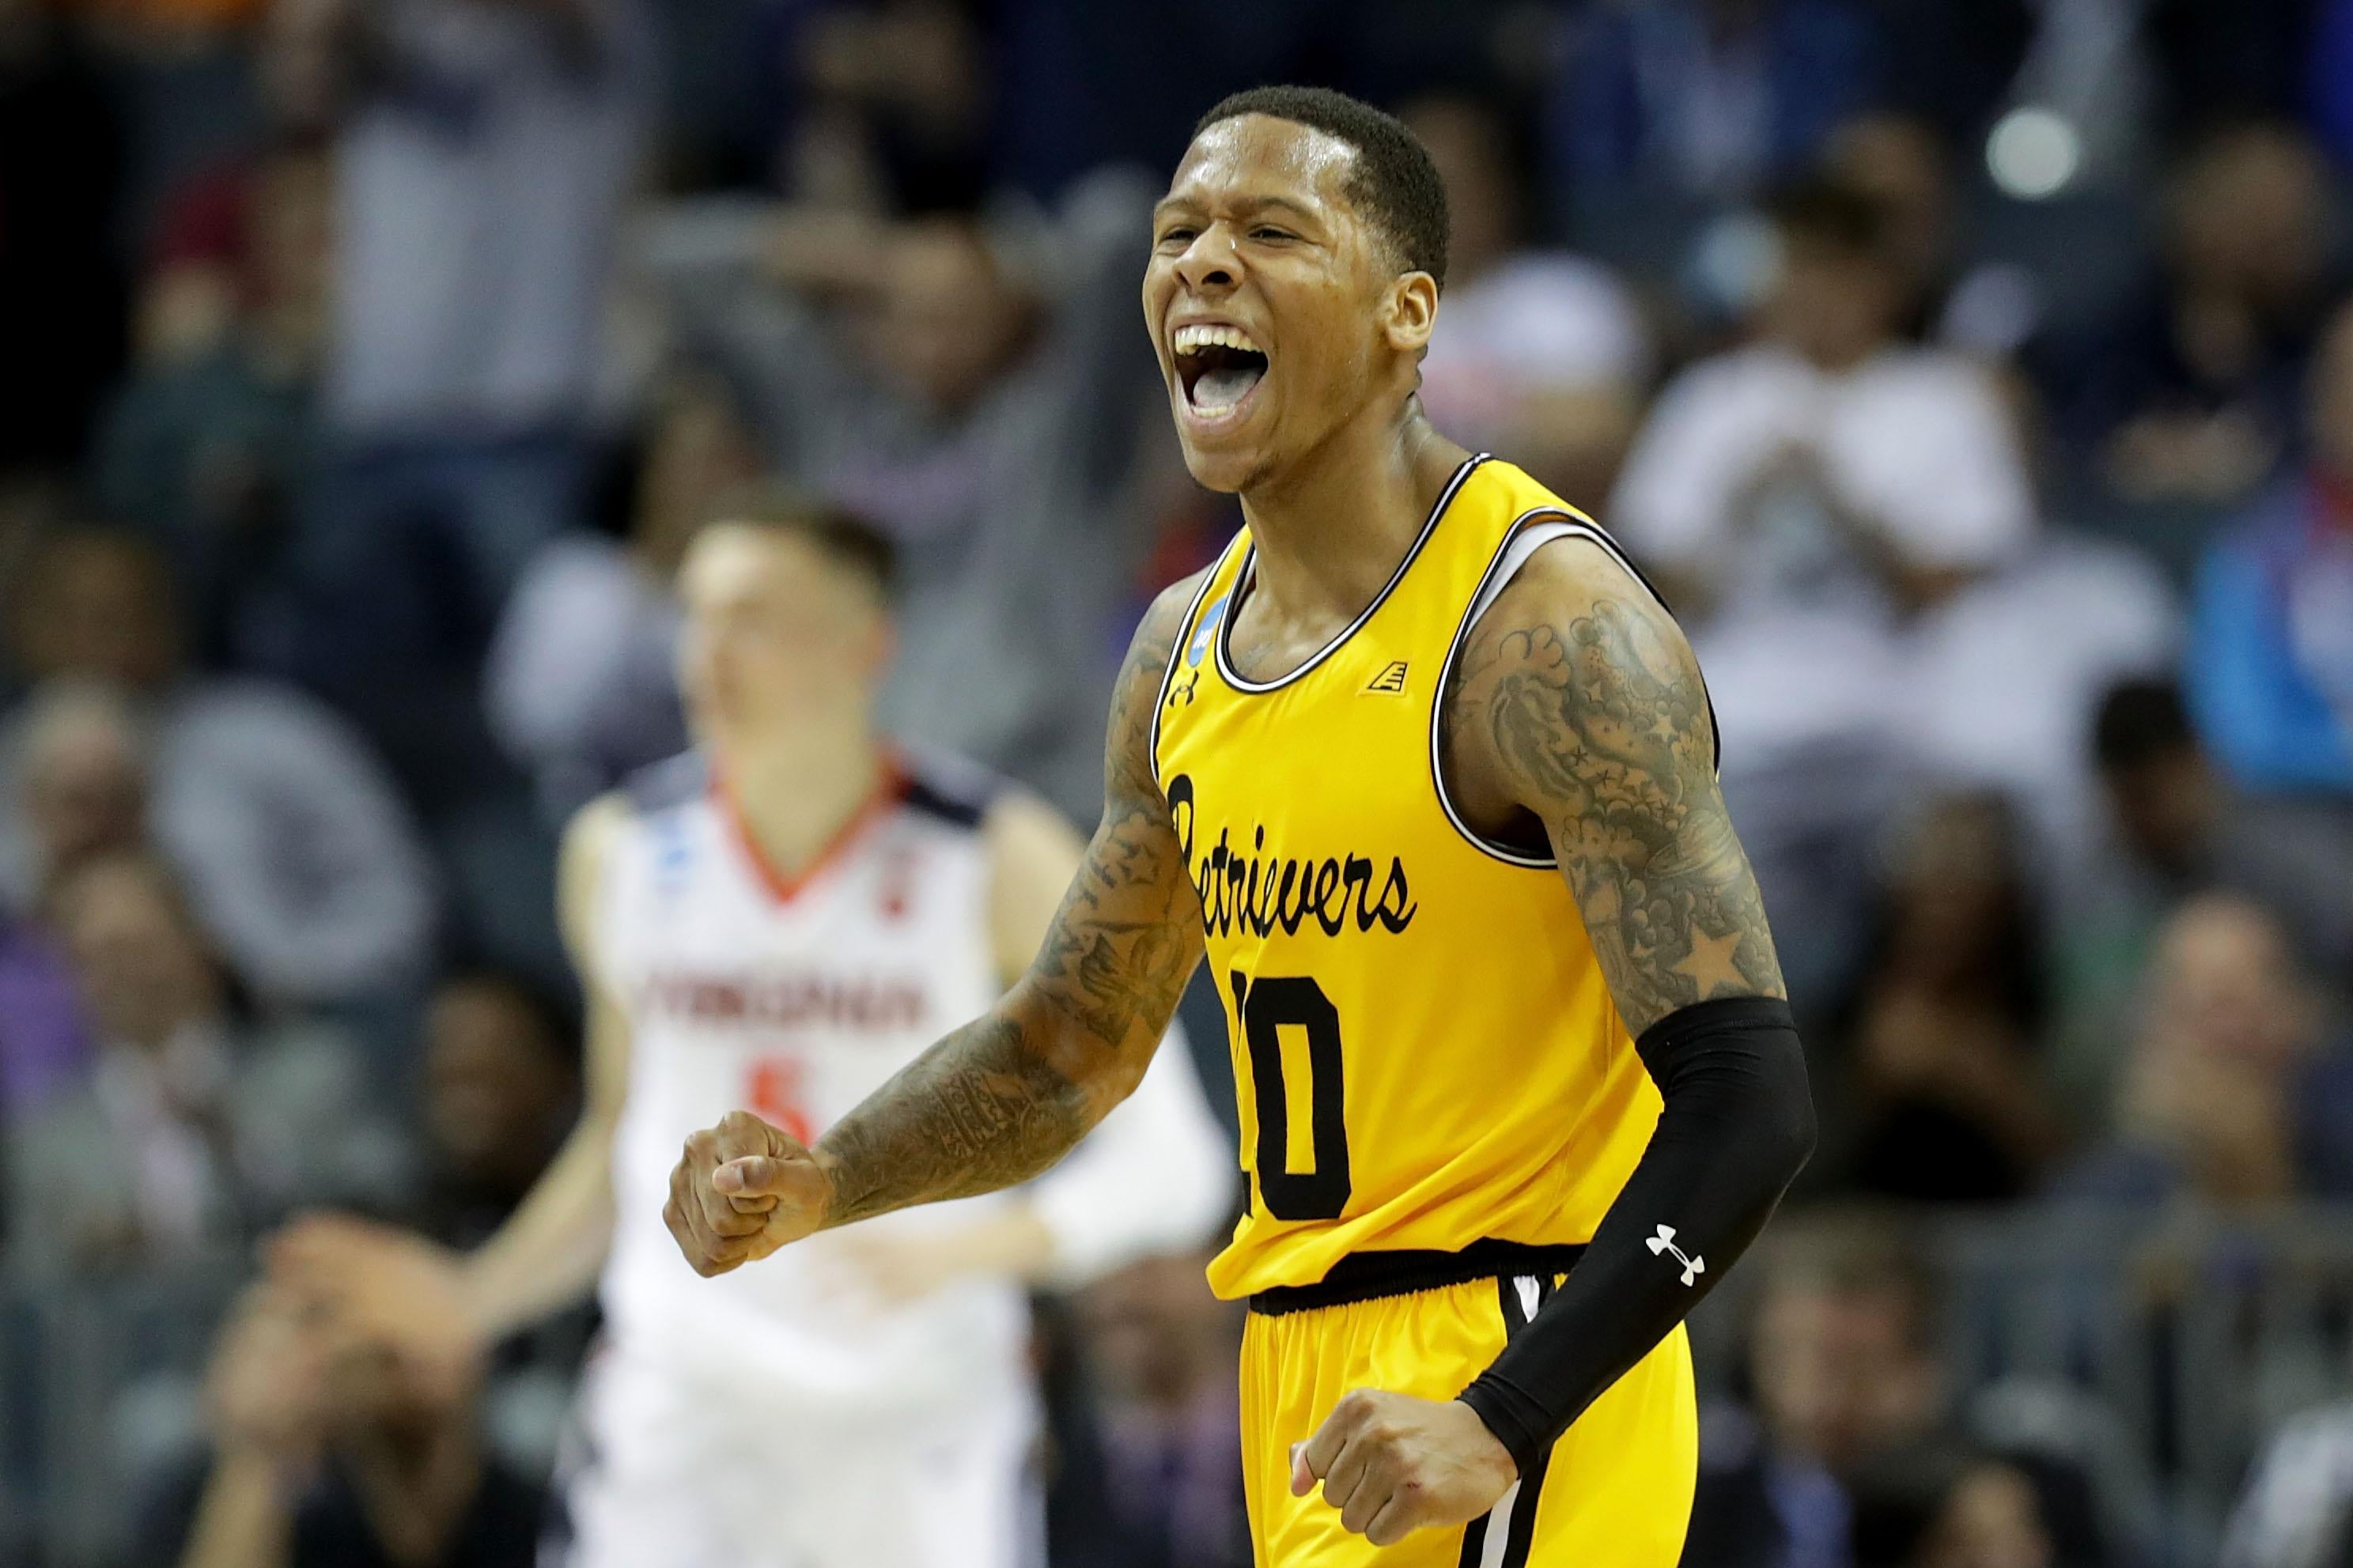 CHARLOTTE, NC - MARCH 16:  Jairus Lyles #10 of the UMBC Retrievers reacts after a score against the Virginia Cavaliers during the first round of the 2018 NCAA Men's Basketball Tournament at Spectrum Center on March 16, 2018 in Charlotte, North Carolina.  (Photo by Streeter Lecka/Getty Images)